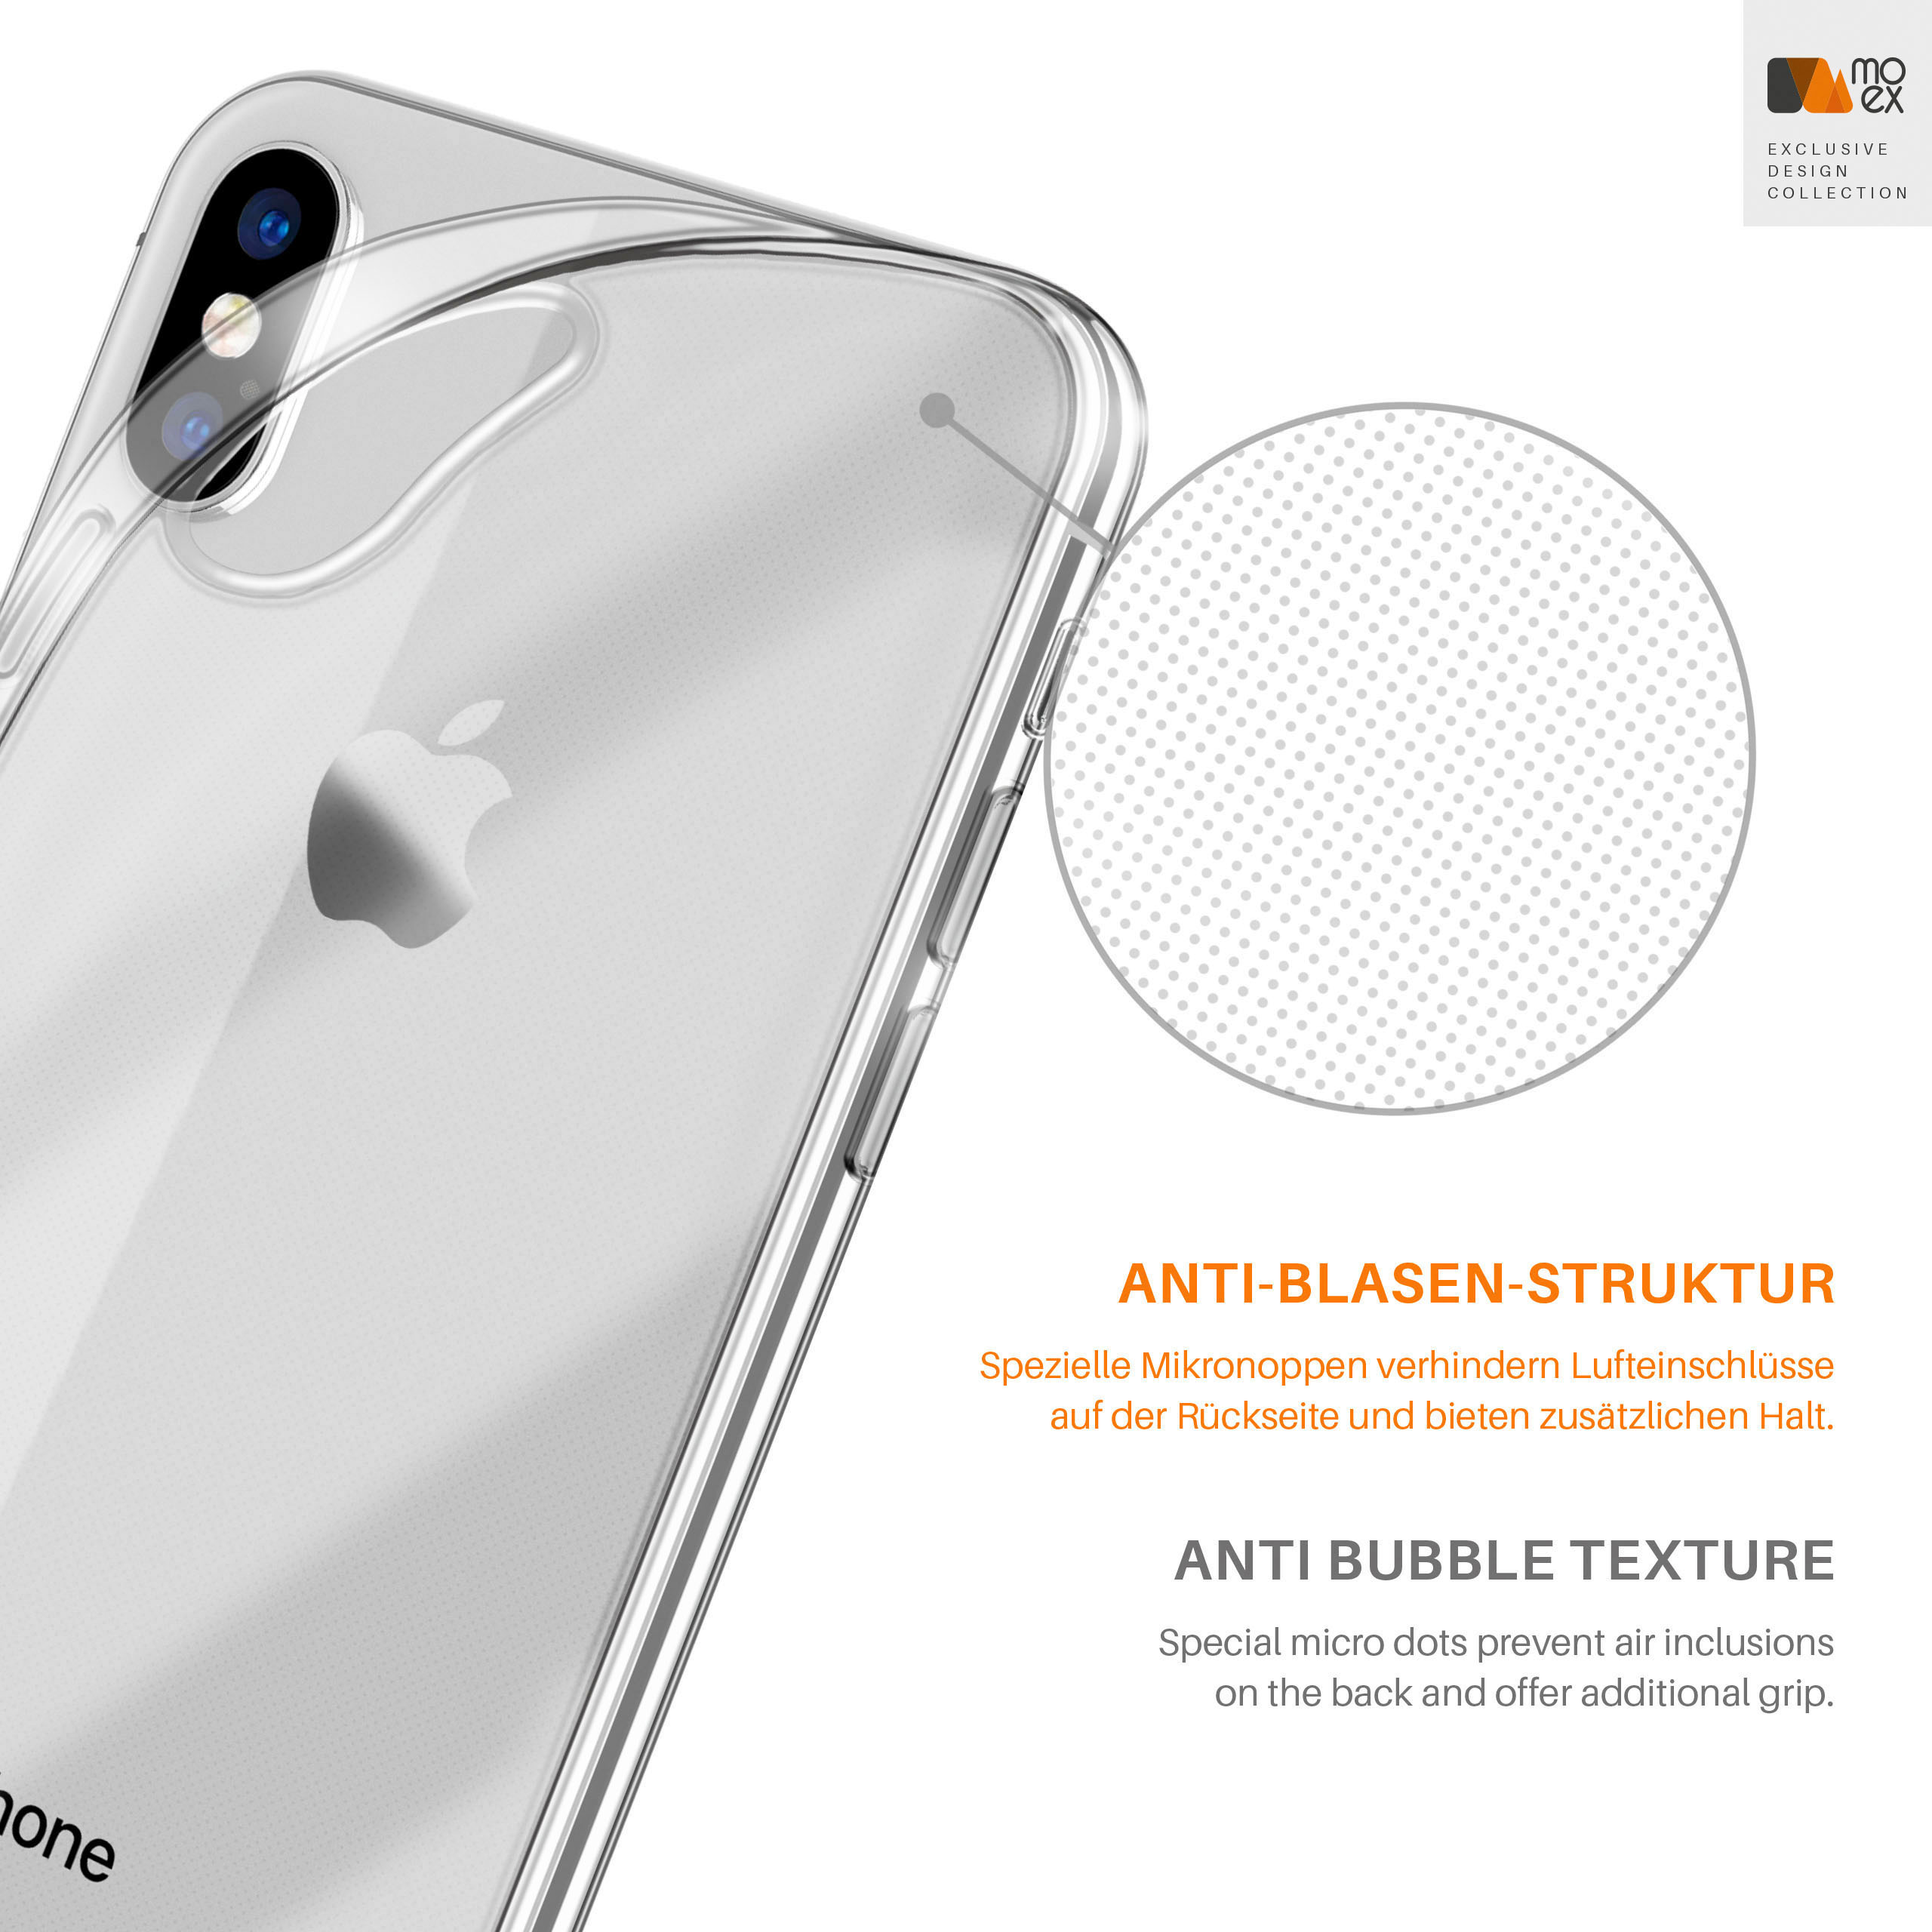 MOEX Aero Case, Backcover, iPhone / Crystal-Clear Apple, iPhone X XS